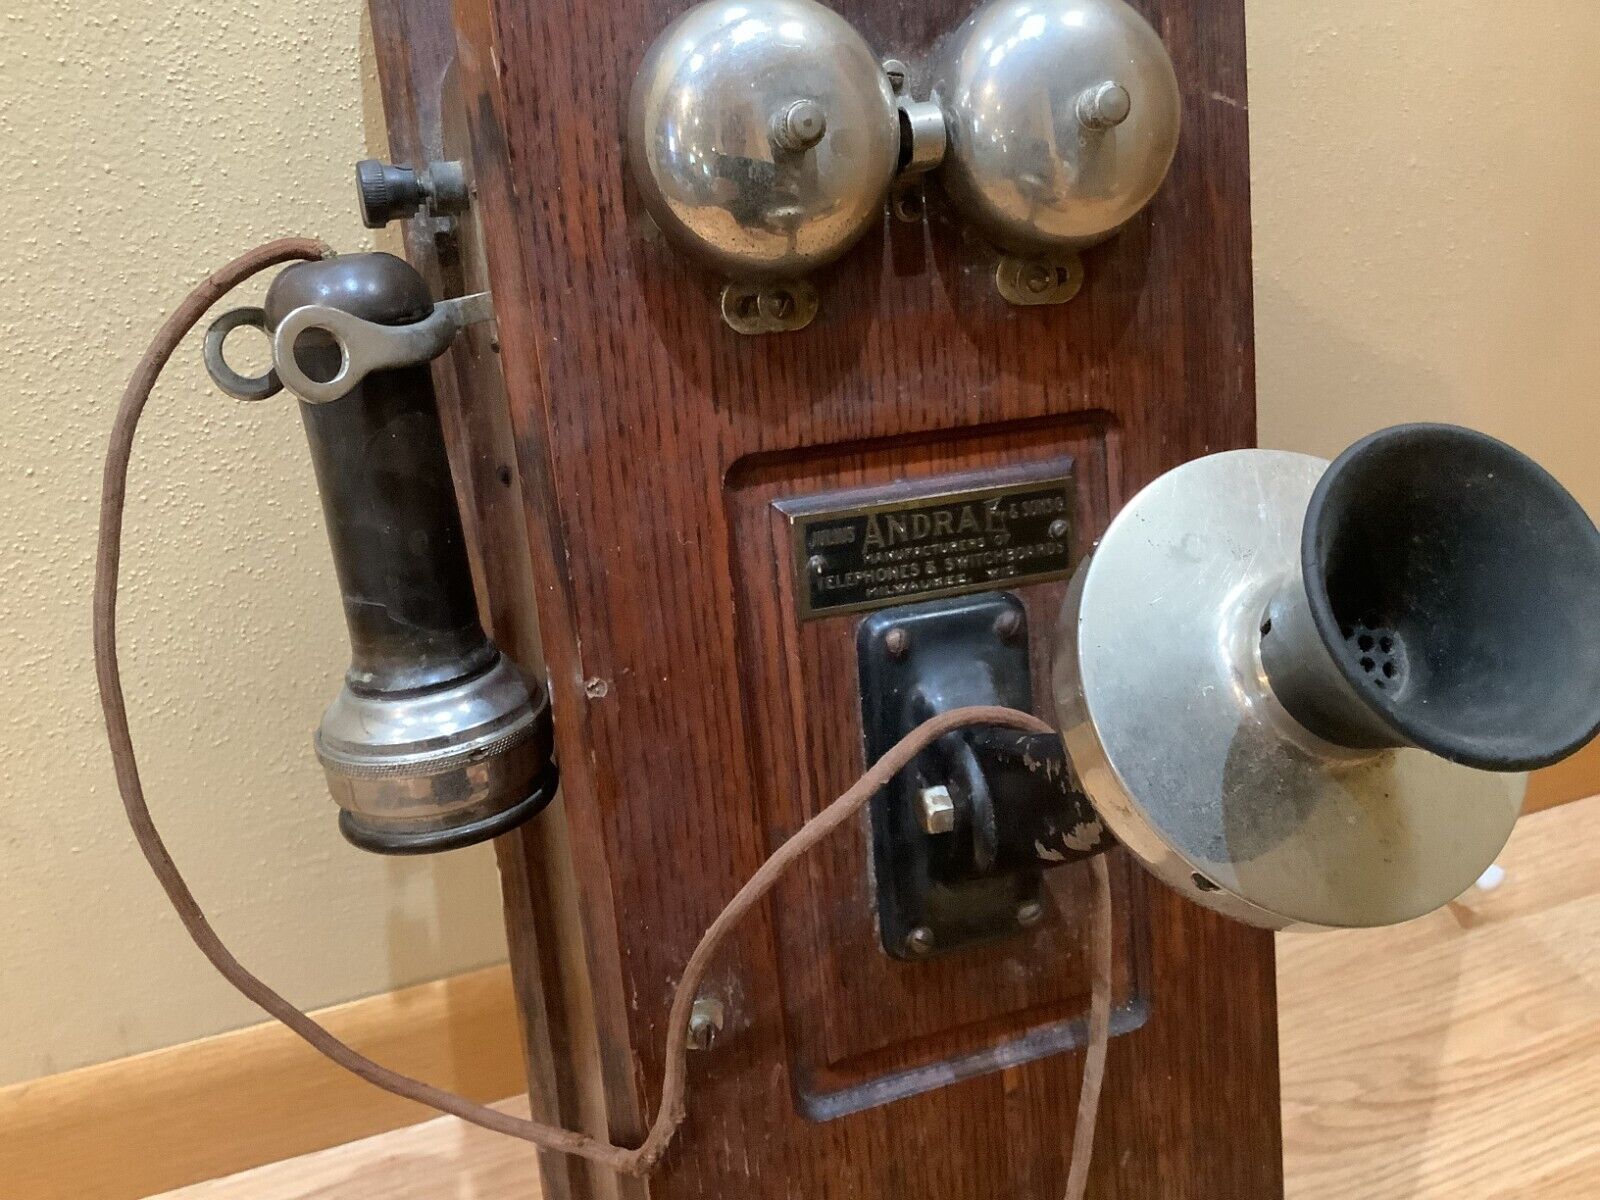 Julius Andrae & Sons - Antique Wall Telephone - 1910-1930 Era  Collectible Phone